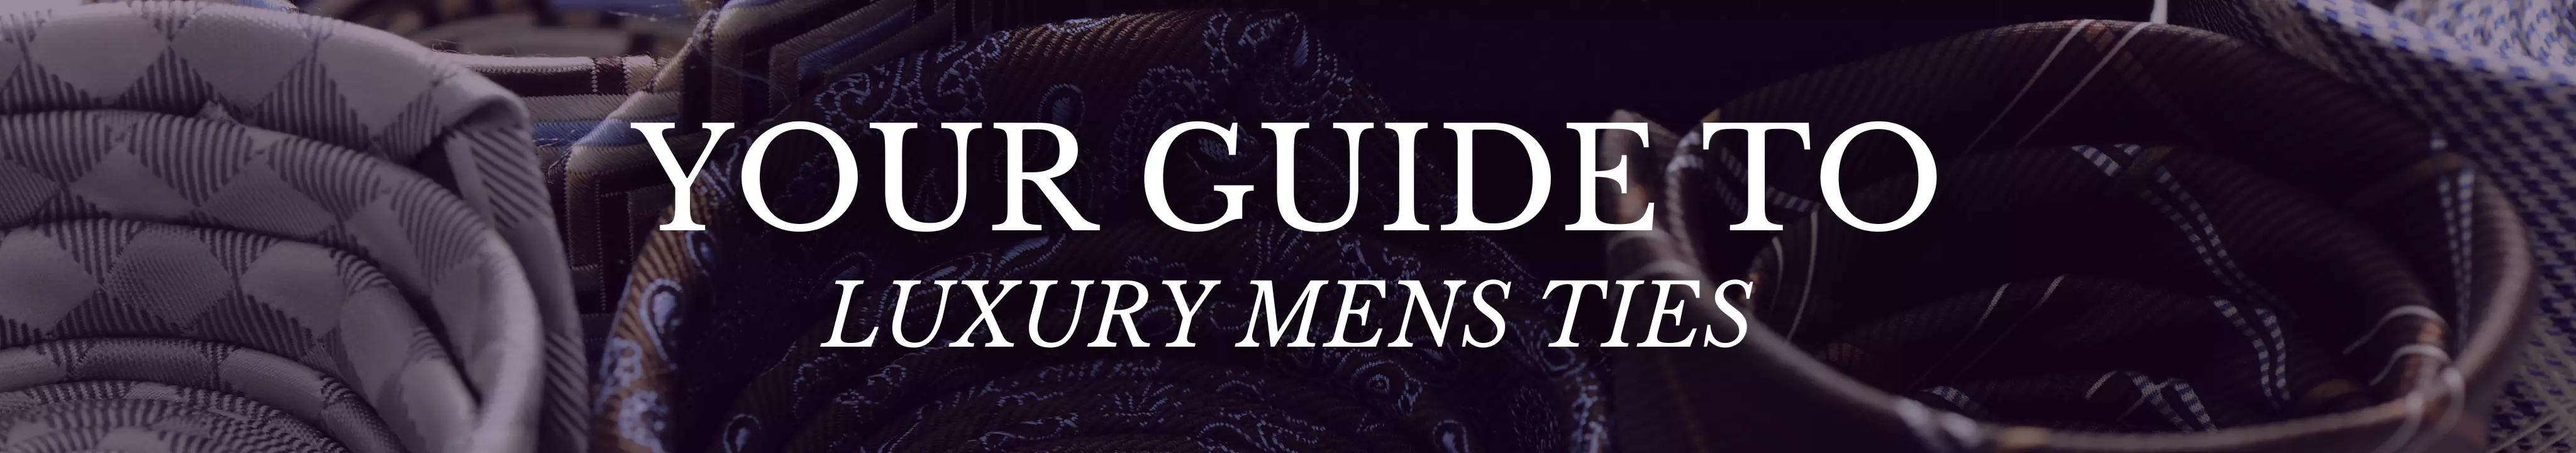 Your Guide to Luxury Mens Ties